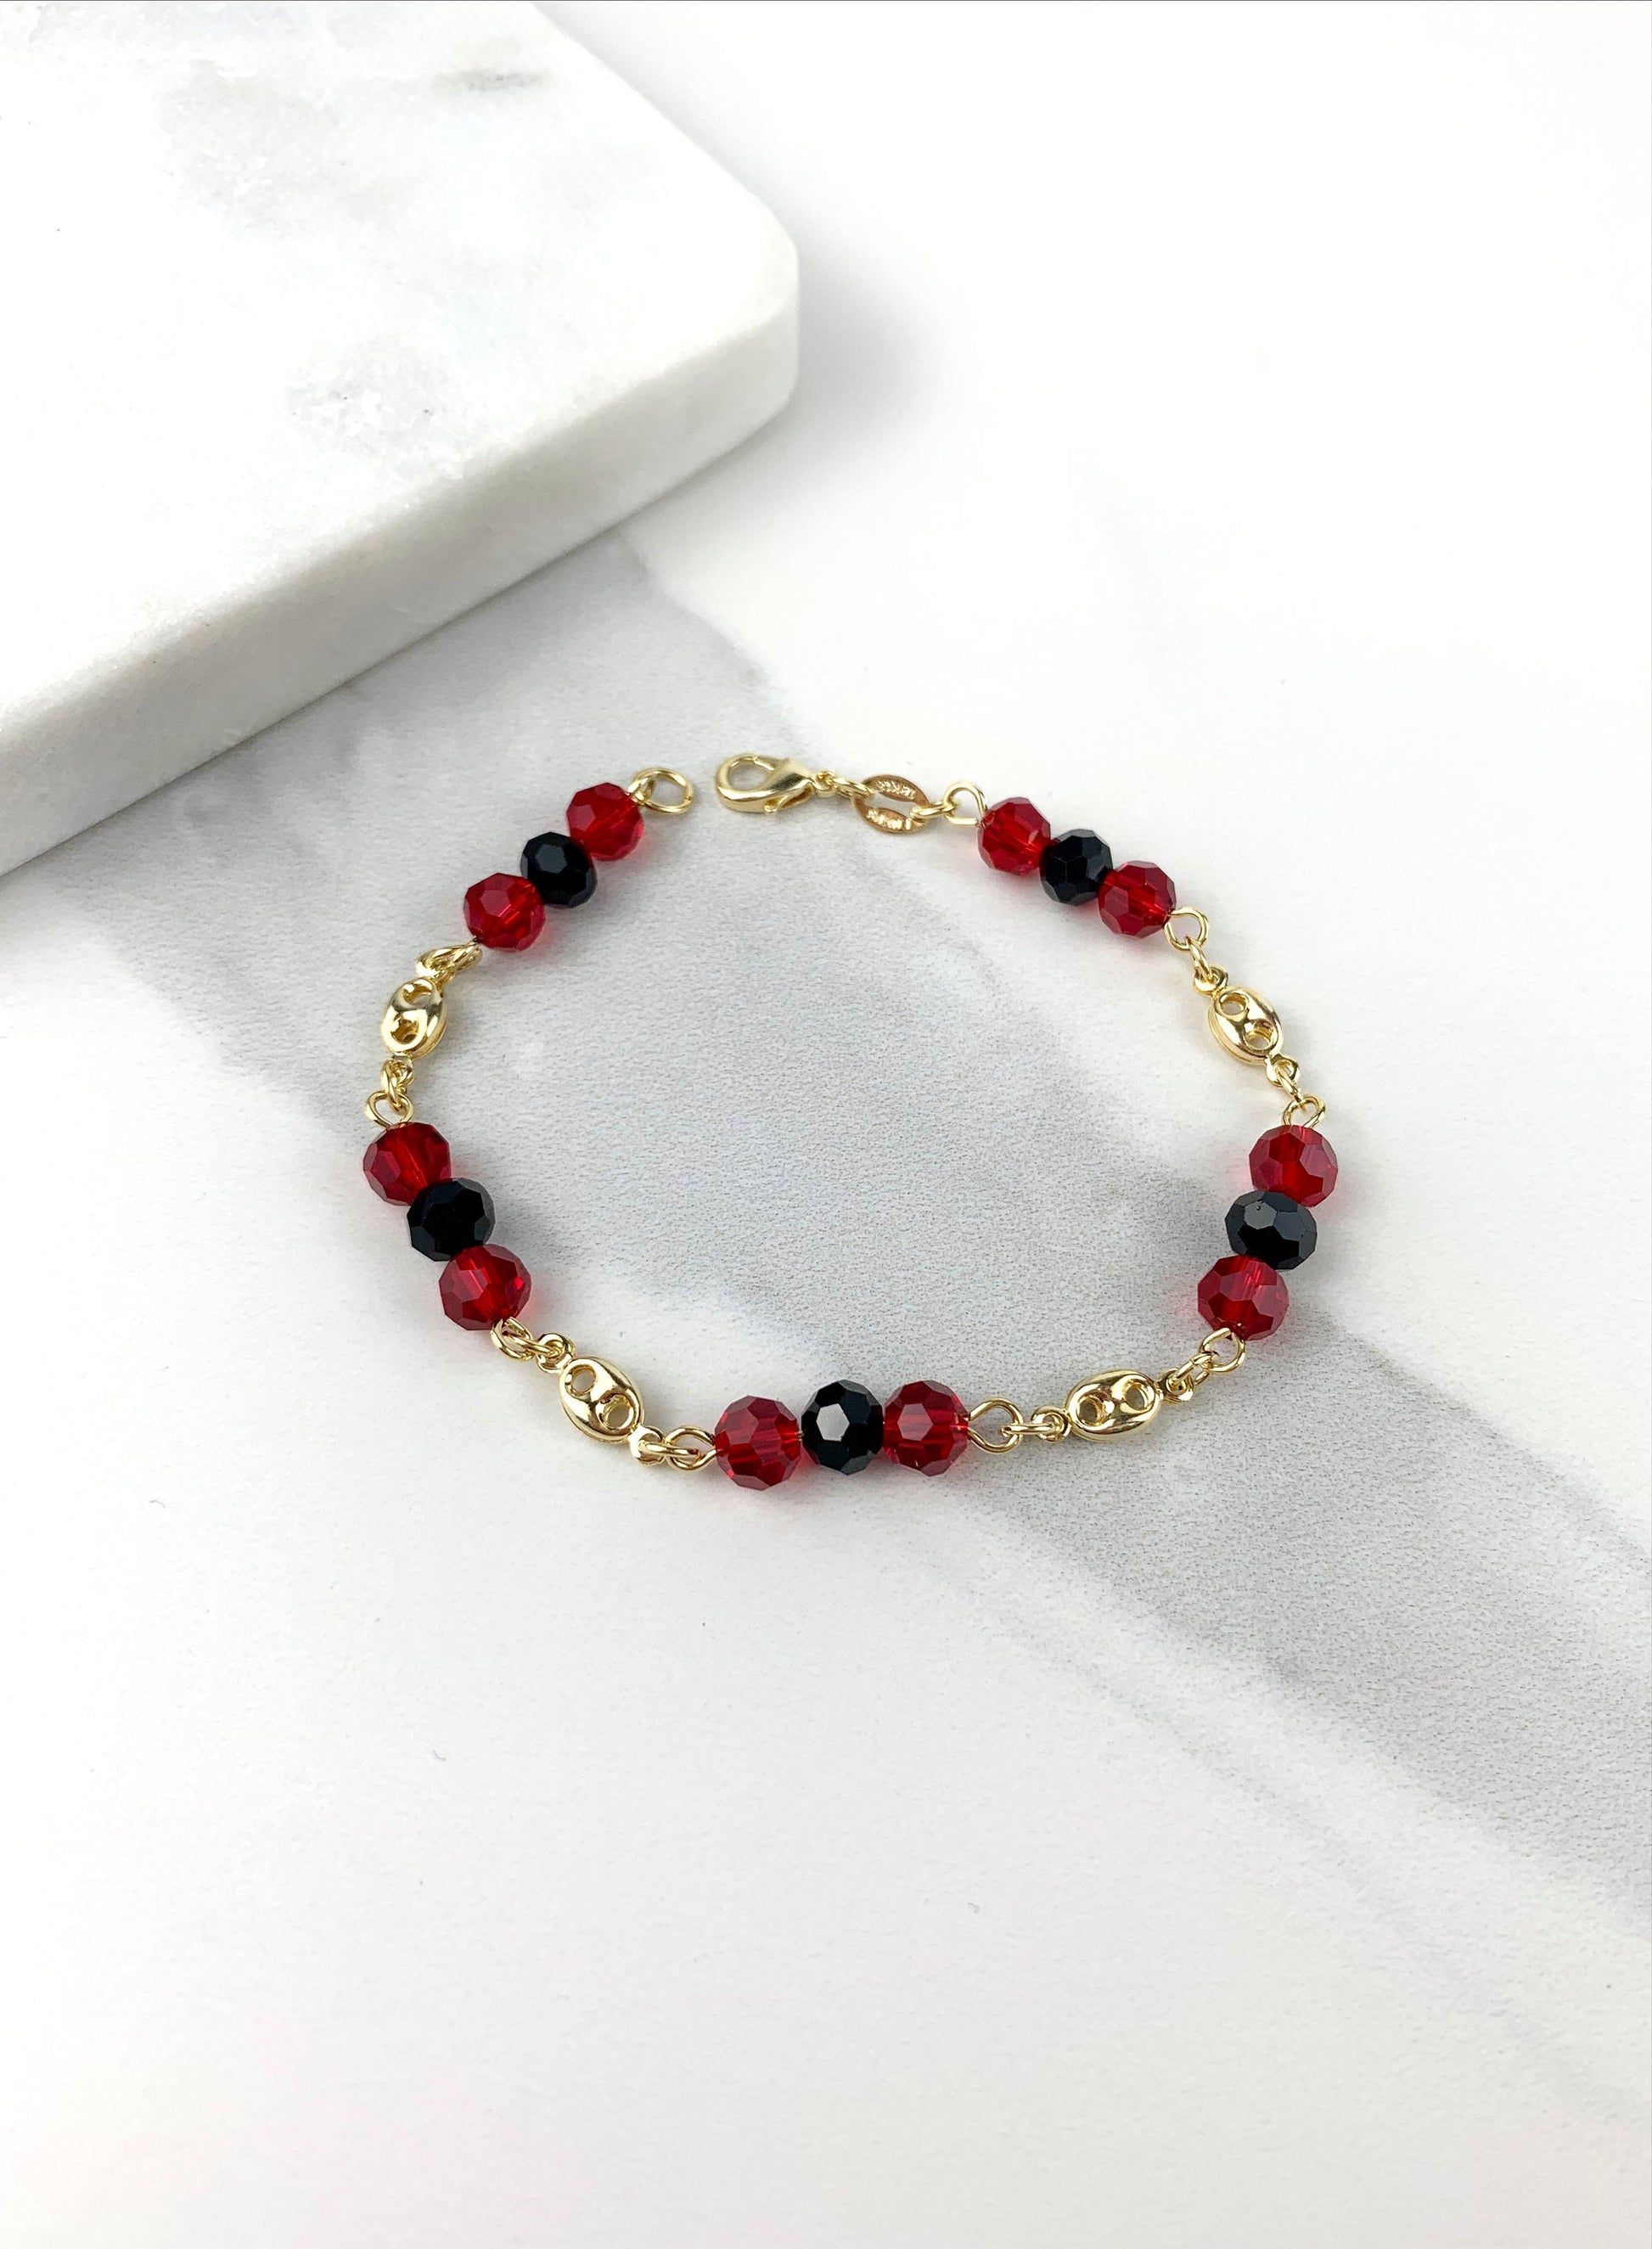 18k Gold Filled Fancy Chunky Link Mariner Chain Linked with Black & Red Beads, Necklace, Bracelet or Earrings, Wholesale Jewelry Supplies